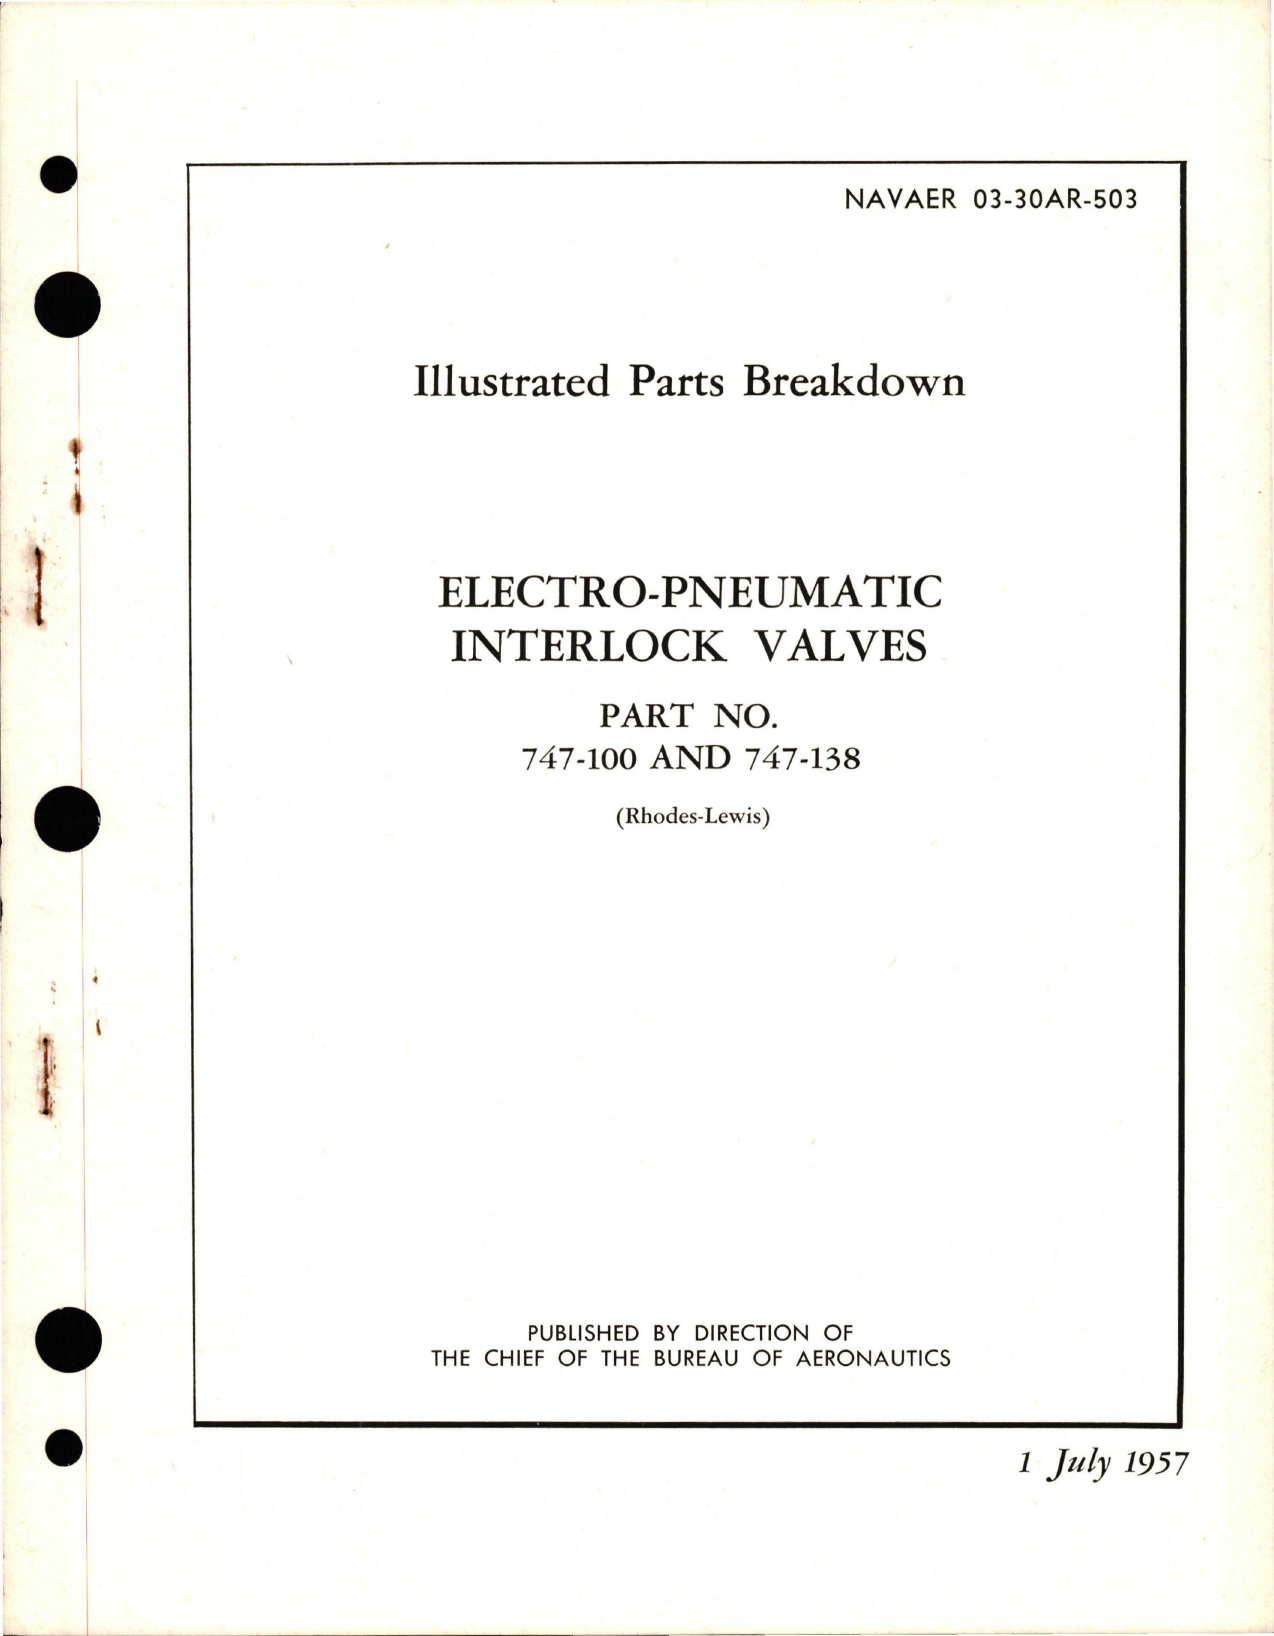 Sample page 1 from AirCorps Library document: Illustrated Parts Breakdown for Elecrtro-Pneumatic Interlock Valves - Parts 747-100 and 747-138 